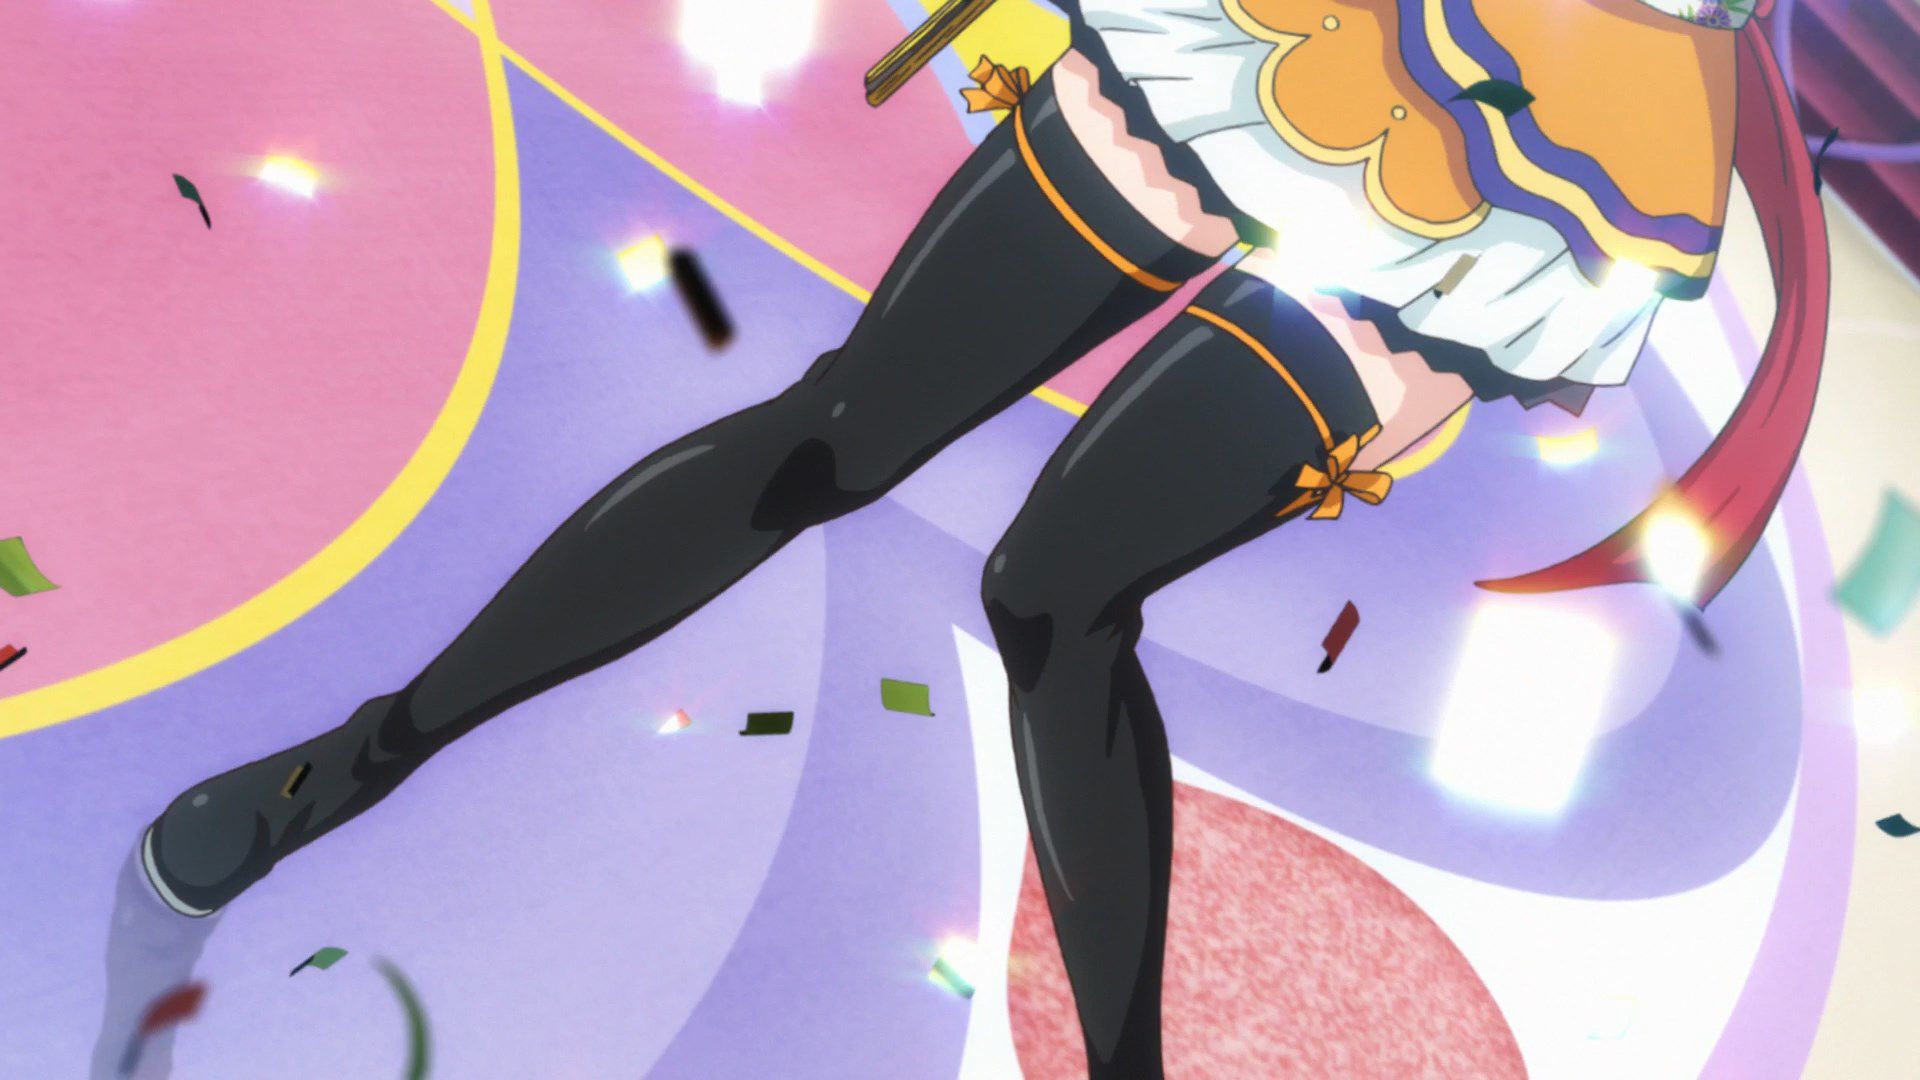 [God images] "love live! ' Μm ' PV's leg is too erotic everyone wakes up to a leg fetish of wwwww 88